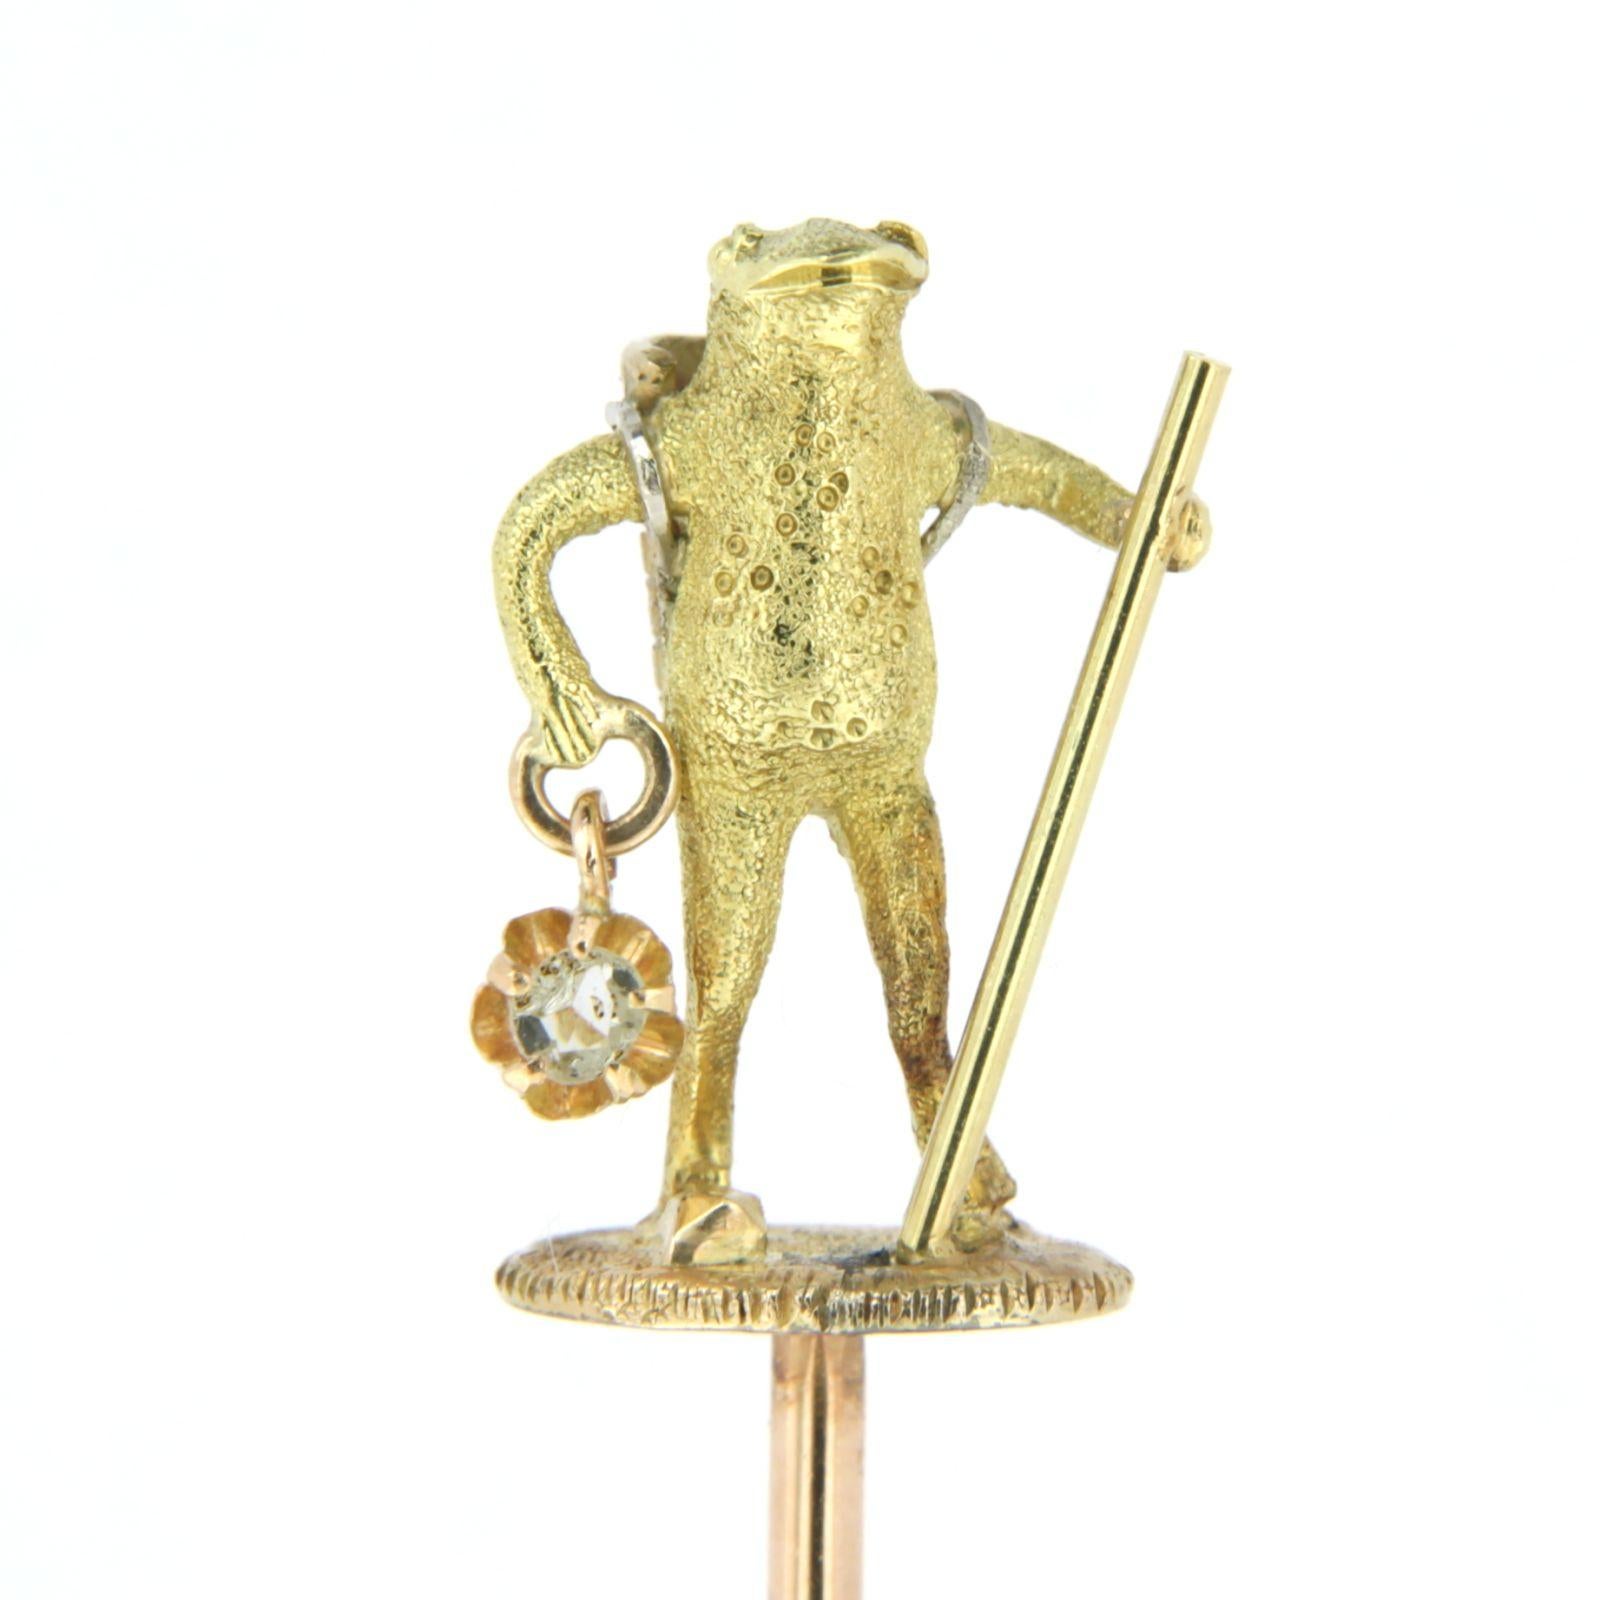 18kt bicolour gold stick pin with a very detailed singing / traveling frog.

Size of the frog : 16 mm high, en 11 mm wide

The stickpin is approx. 8.0 cm long
Total weigth 3.9 gram